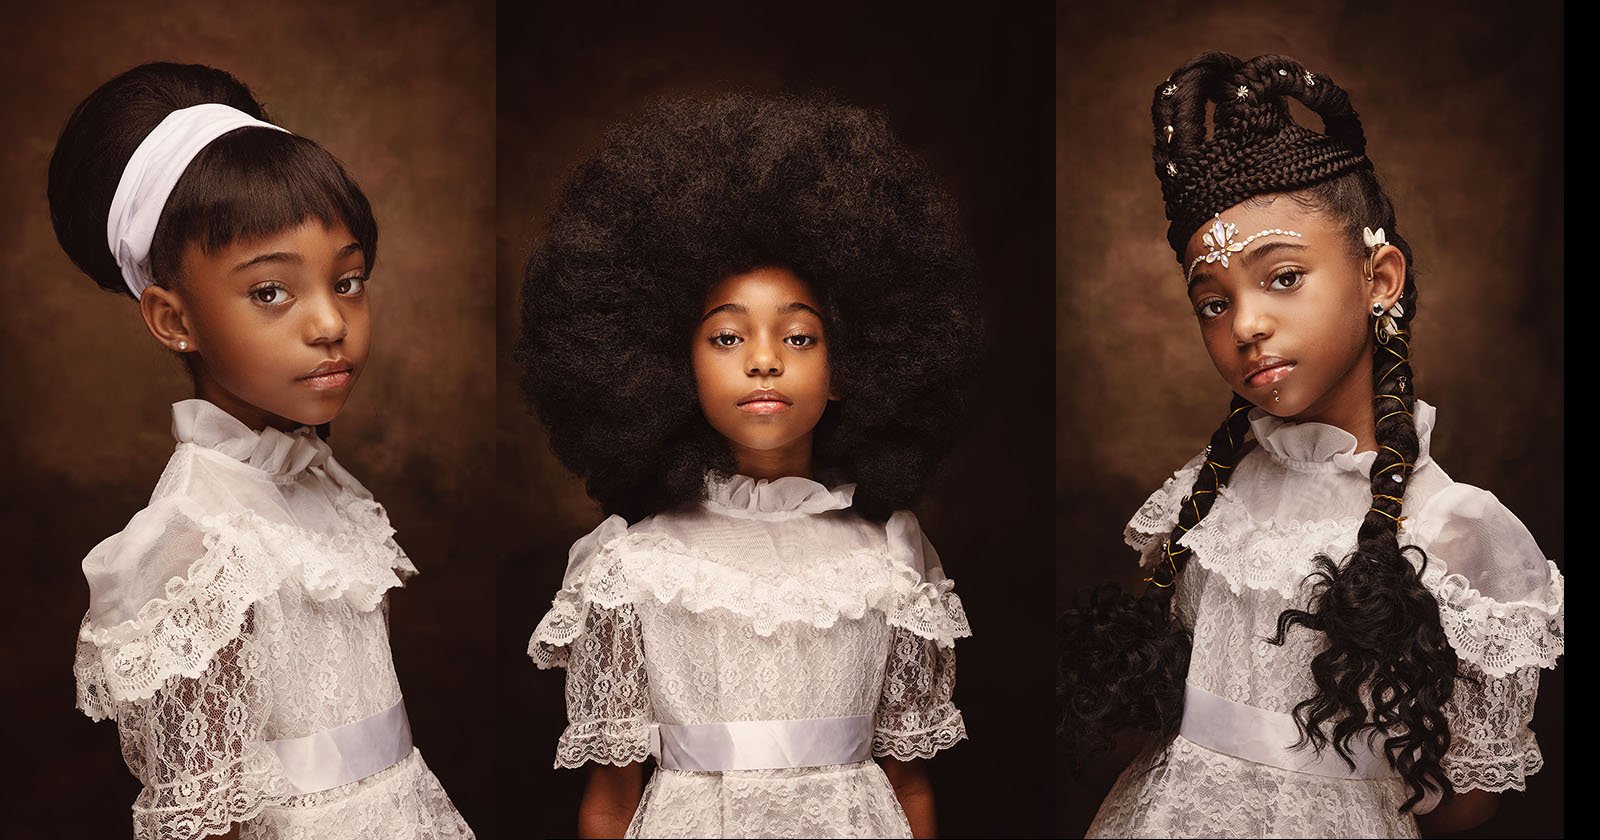 These Portraits Celebrate the History of Black Hair Styles | PetaPixel